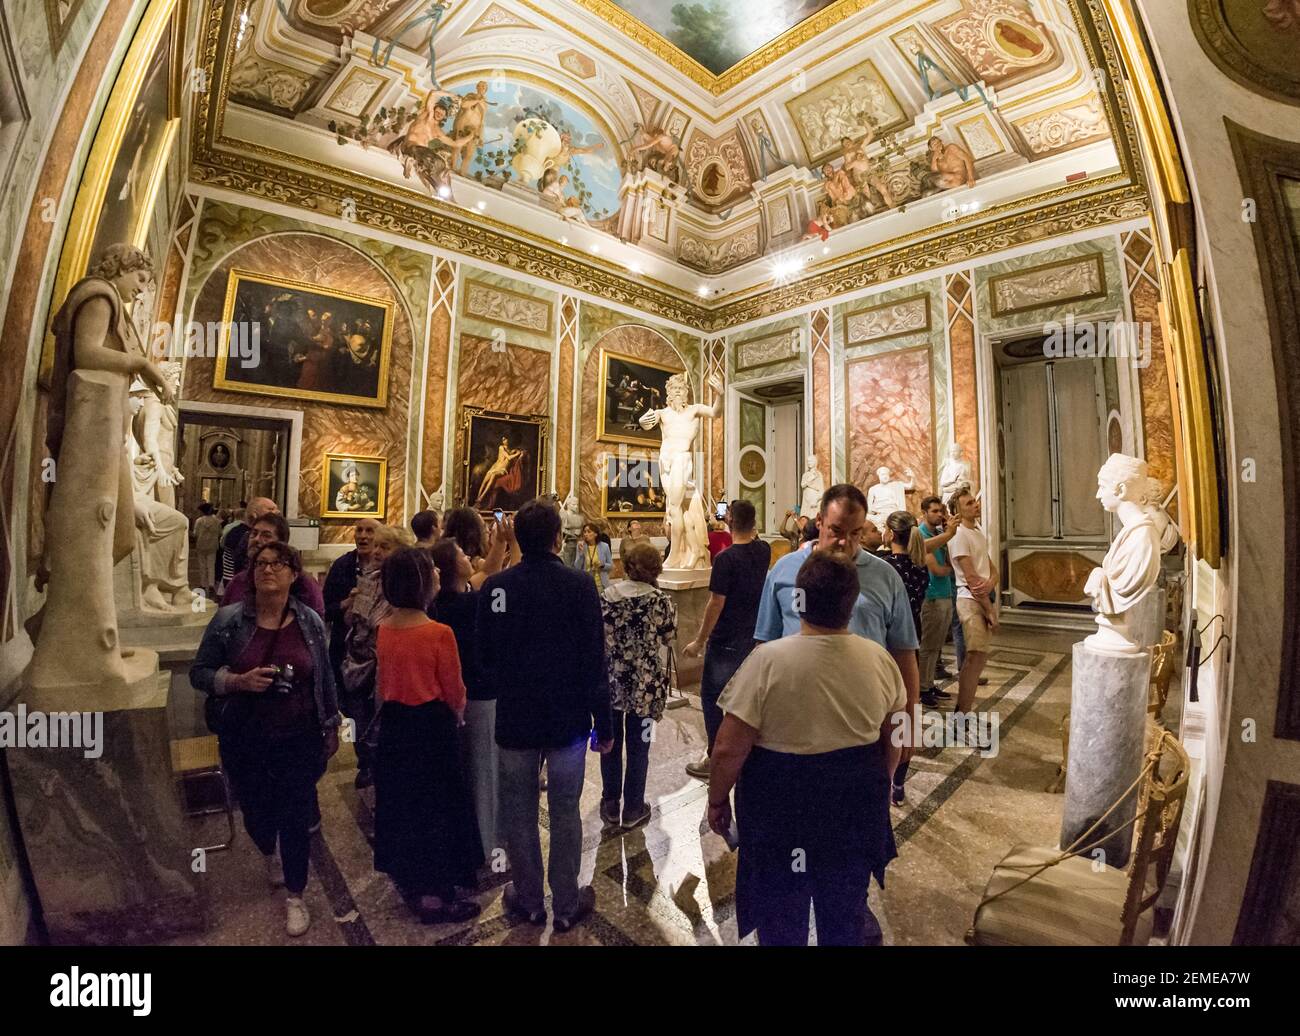 Rome, Italy - Oct 05, 2018: Tourists admire the sculpture of Dancing satyr in the Borghese Gallery, Rome Stock Photo